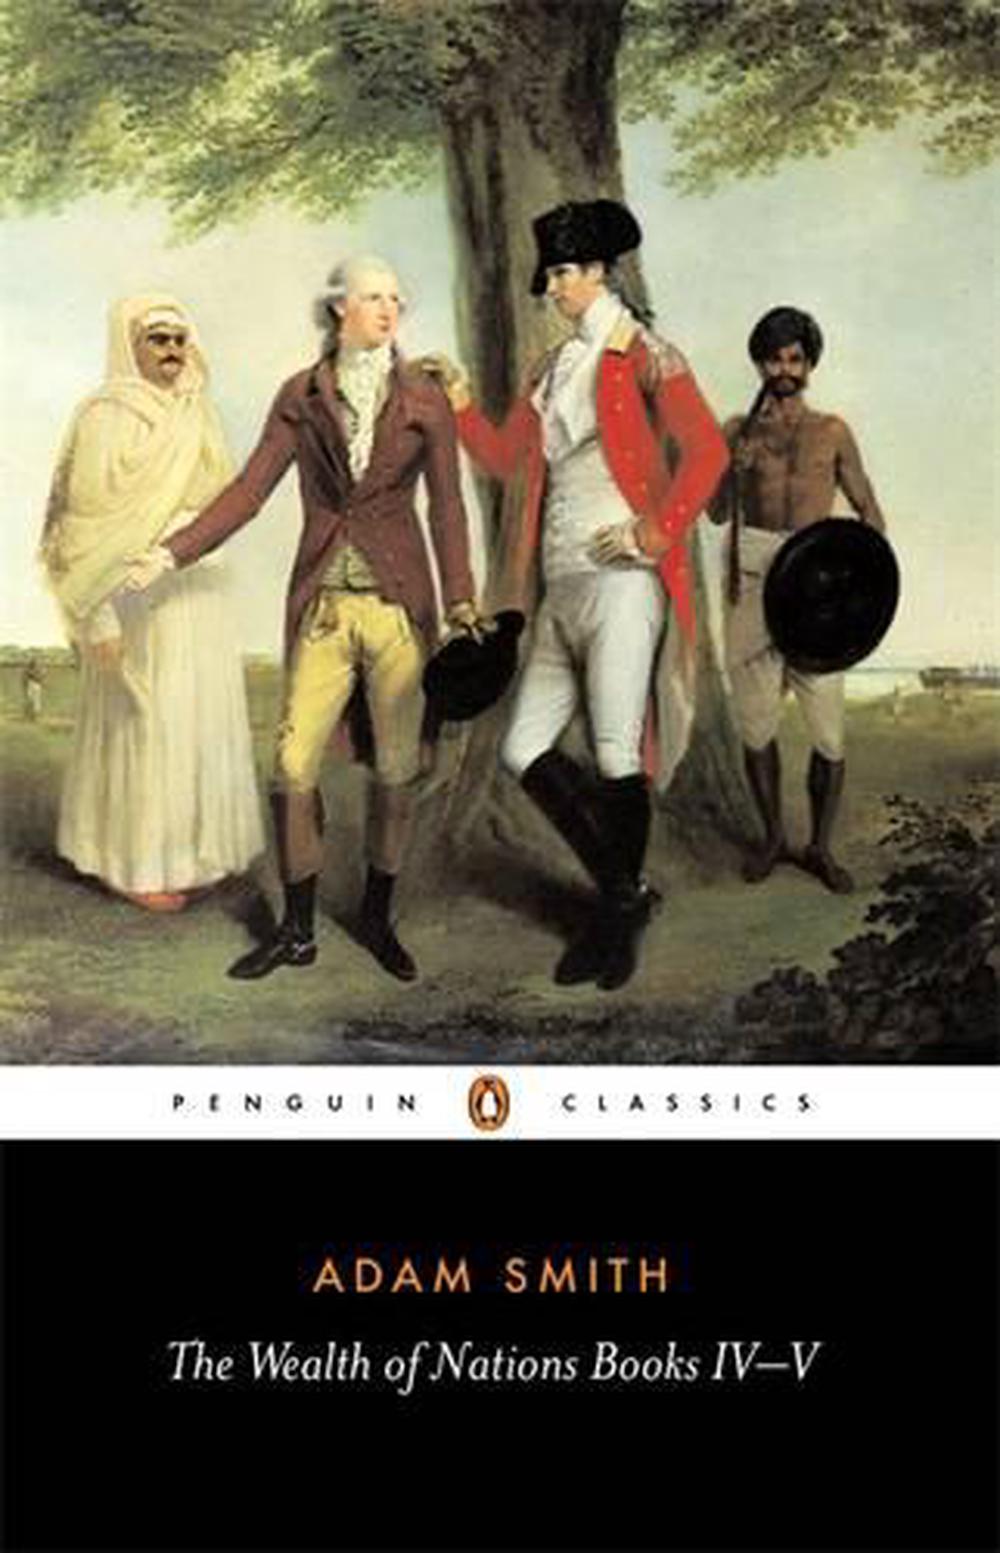 Smith,　at　by　Wealth　Paperback,　of　The　Nile　online　The　Nations　9780140436150　Adam　Buy